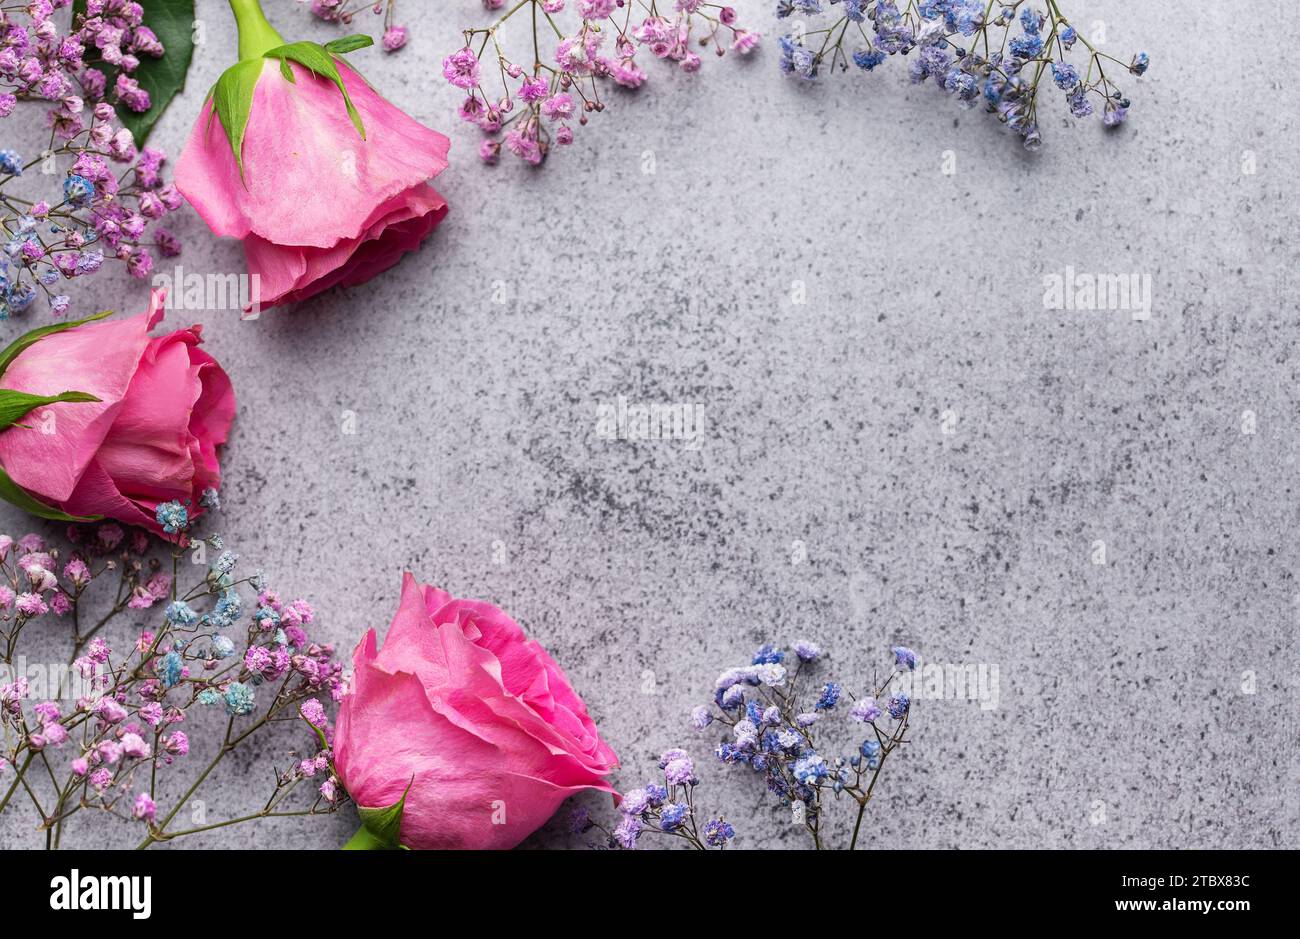 Colored gypsophila flowers and pink roses on concrete background with copy space. Stock Photo